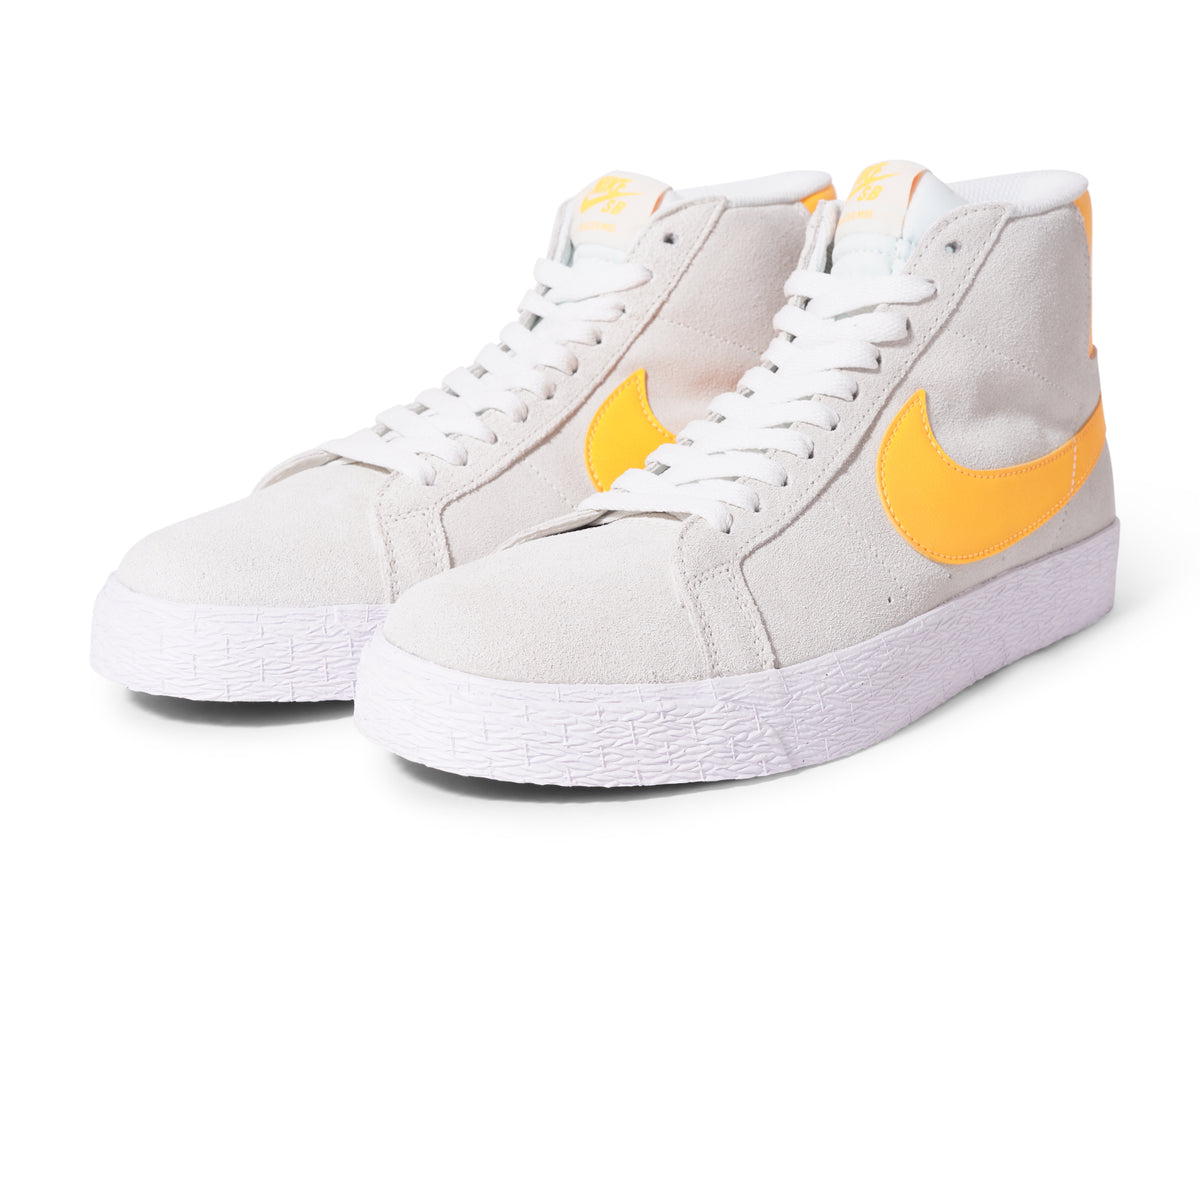 We have a huge choice of Zoom Blazer Mid, Summit White / Laser